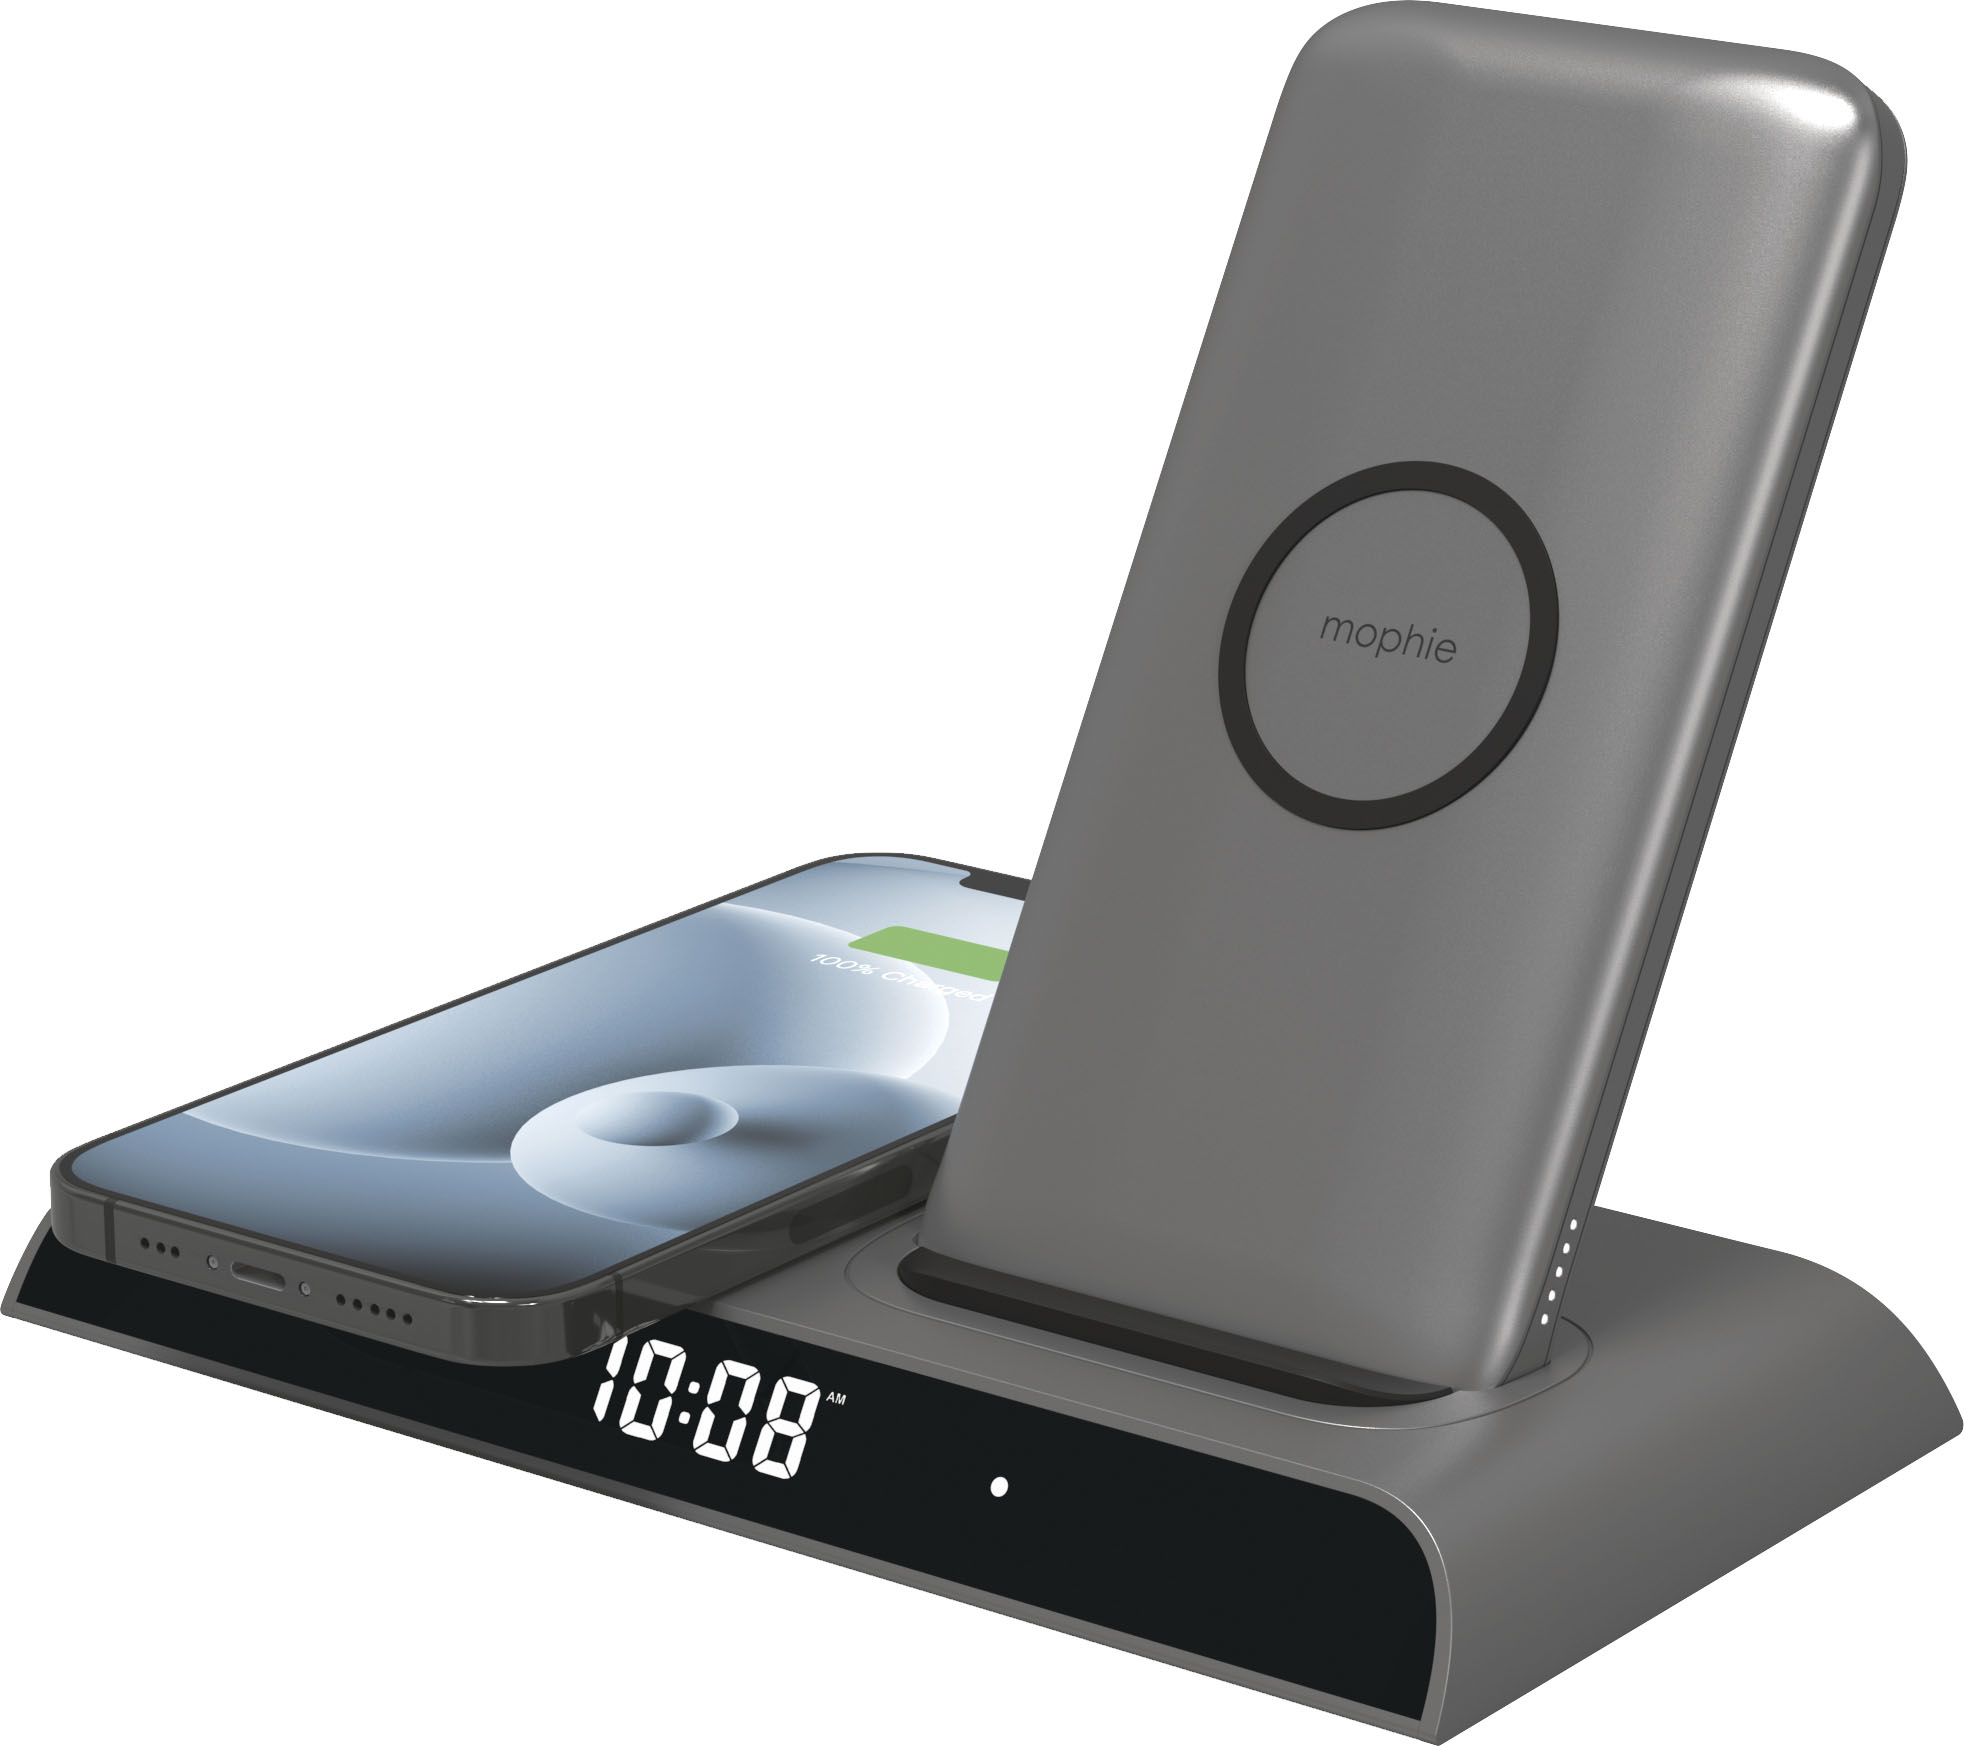 mophie - Powerstation 10W Wireless Charging Dock with Removable Power Bank for Qi-enabled Devices - Charcoal